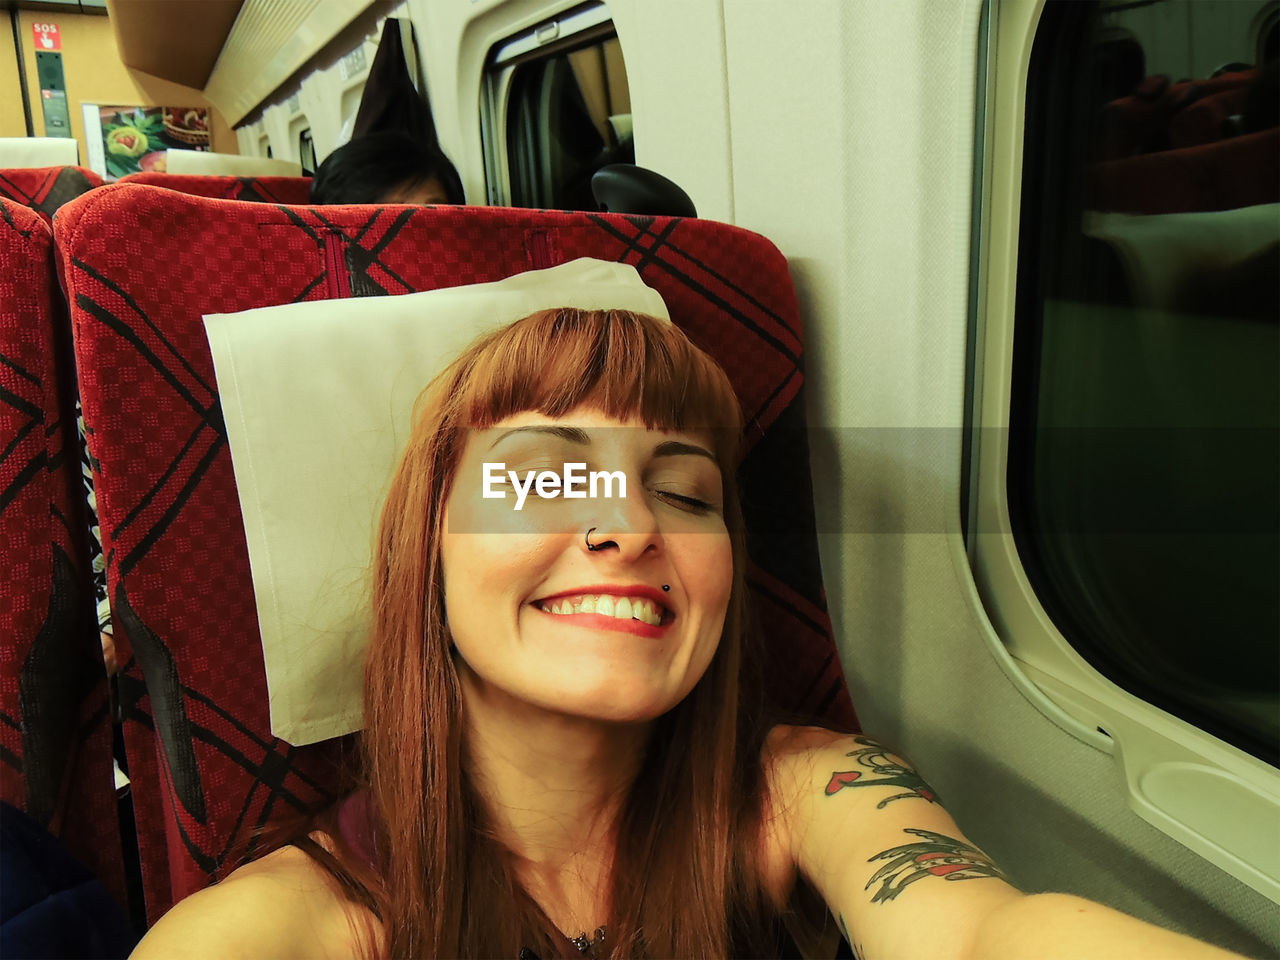 Self-portrait of a young traveler with red straight hair smiling with eyes closed inside of a train